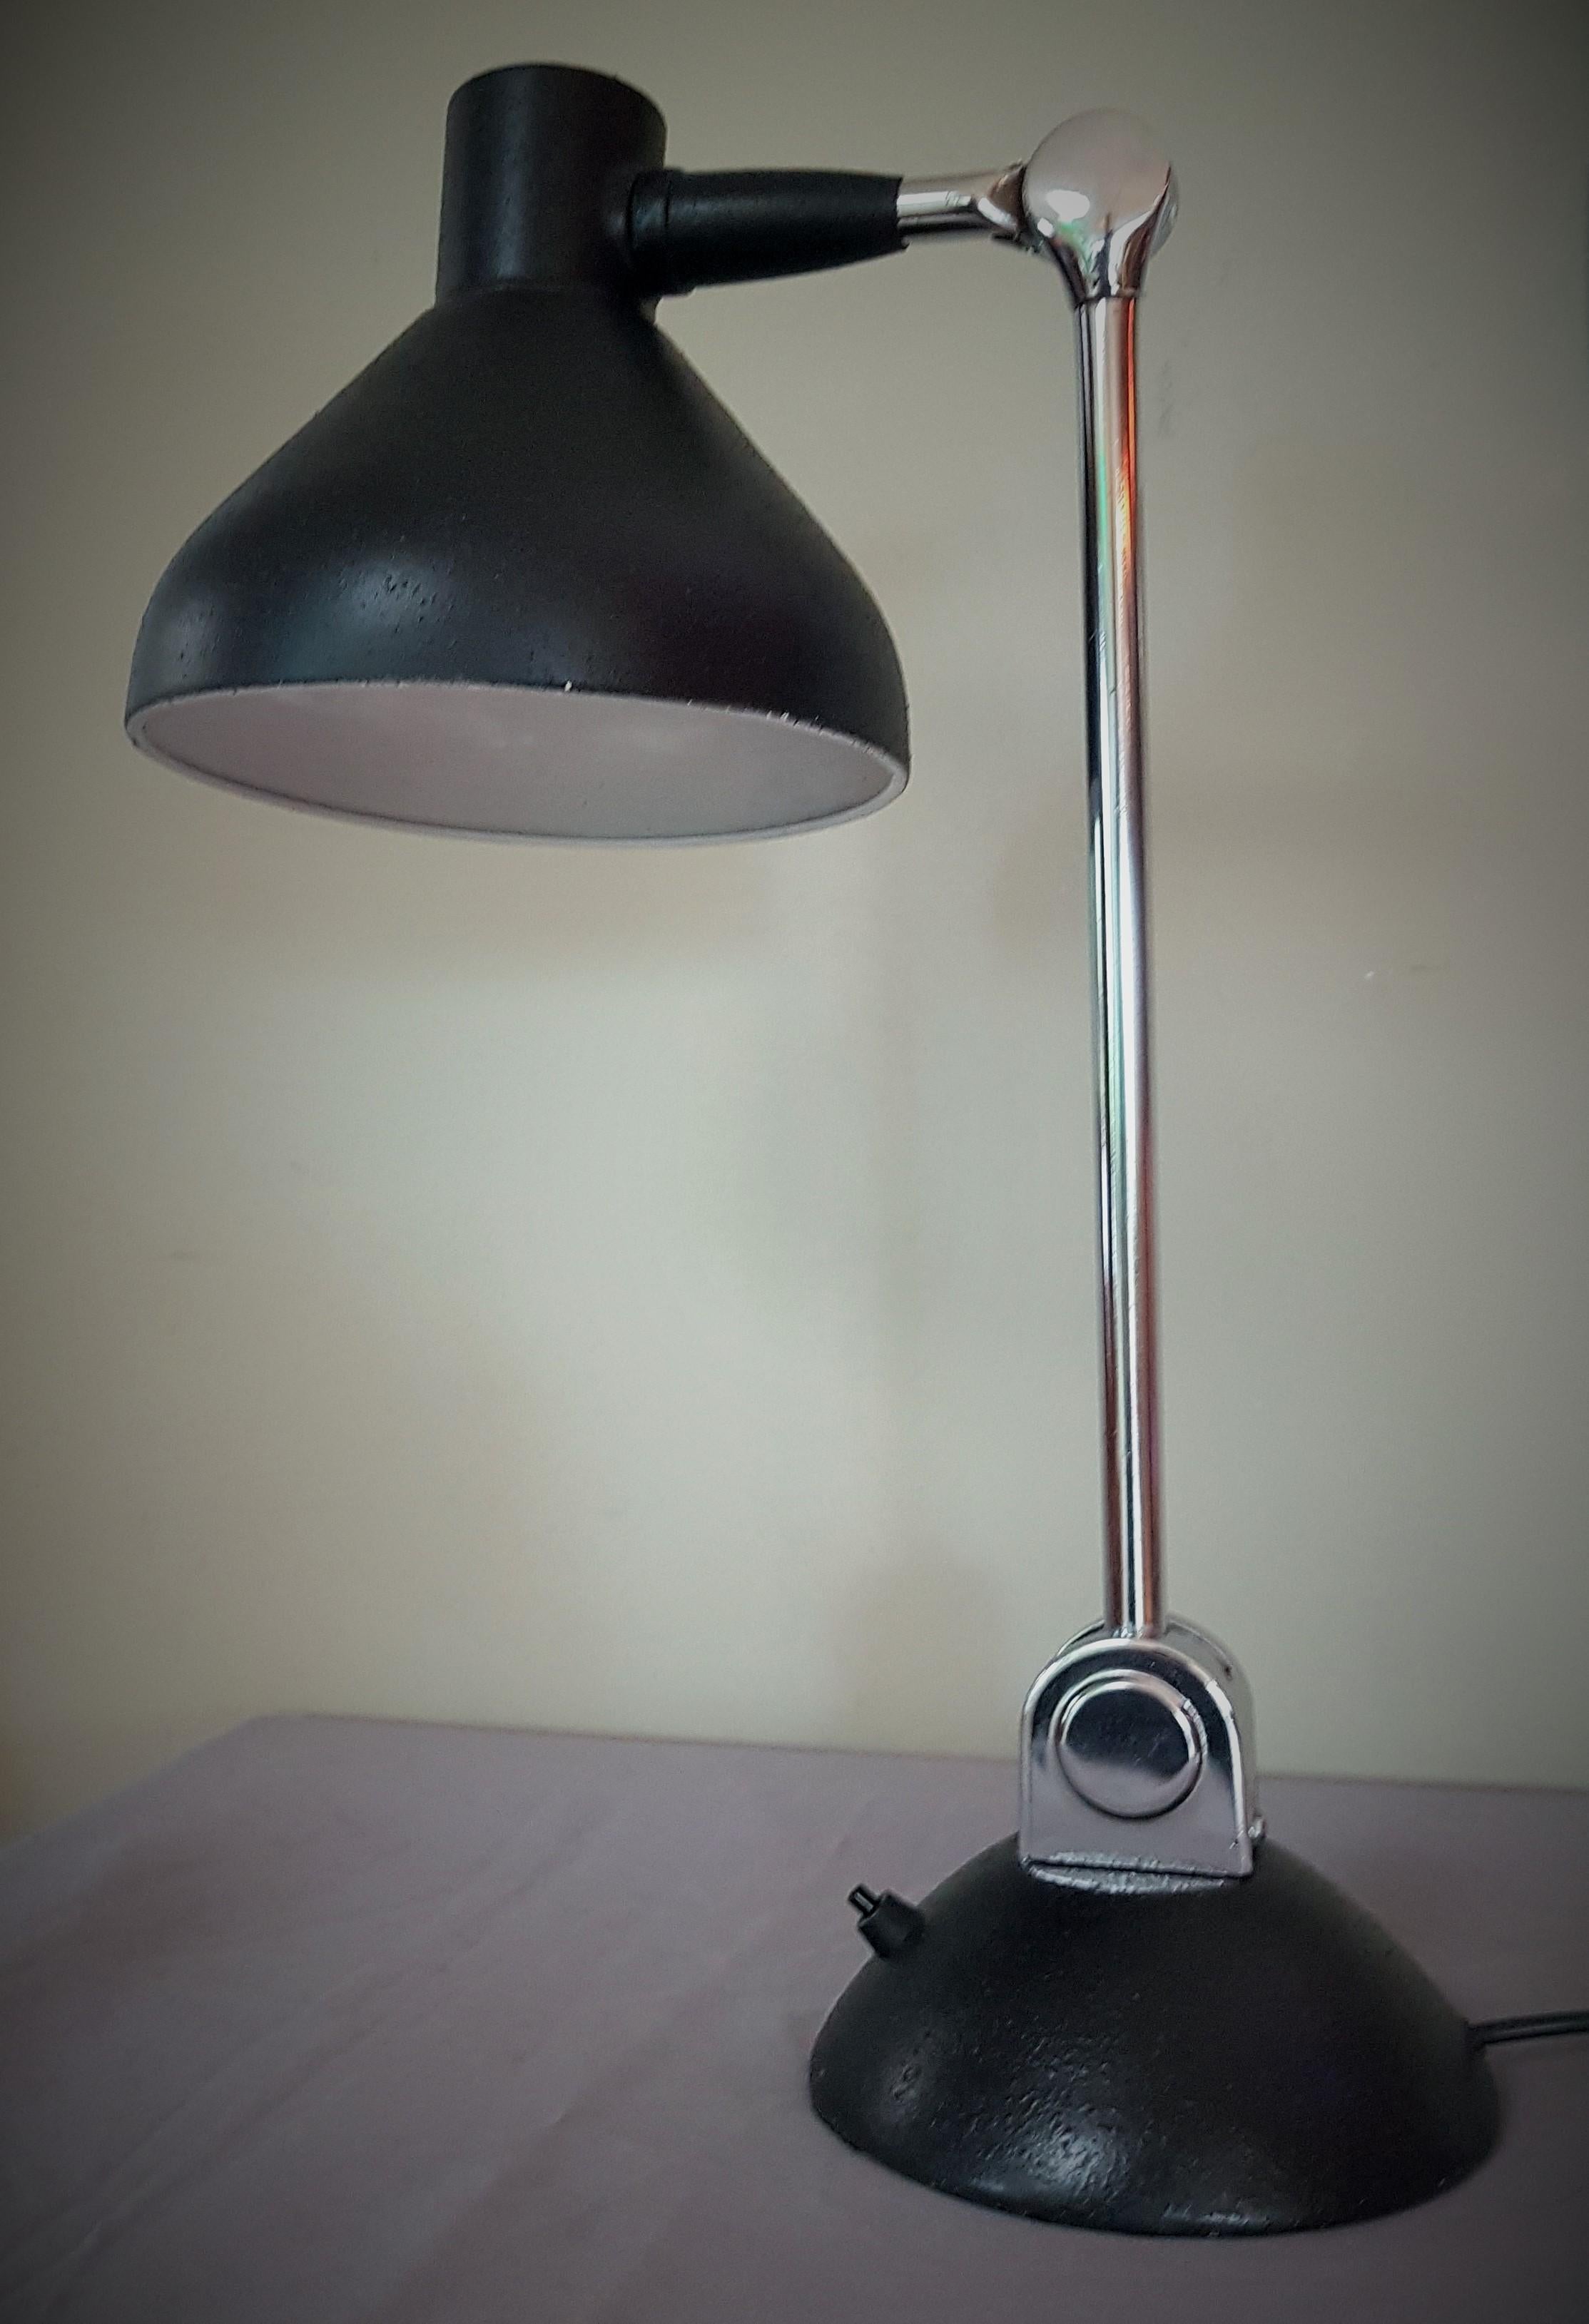 Aluminum Art Deco Industrial Table Lamp by Jumo, France 1930s For Sale